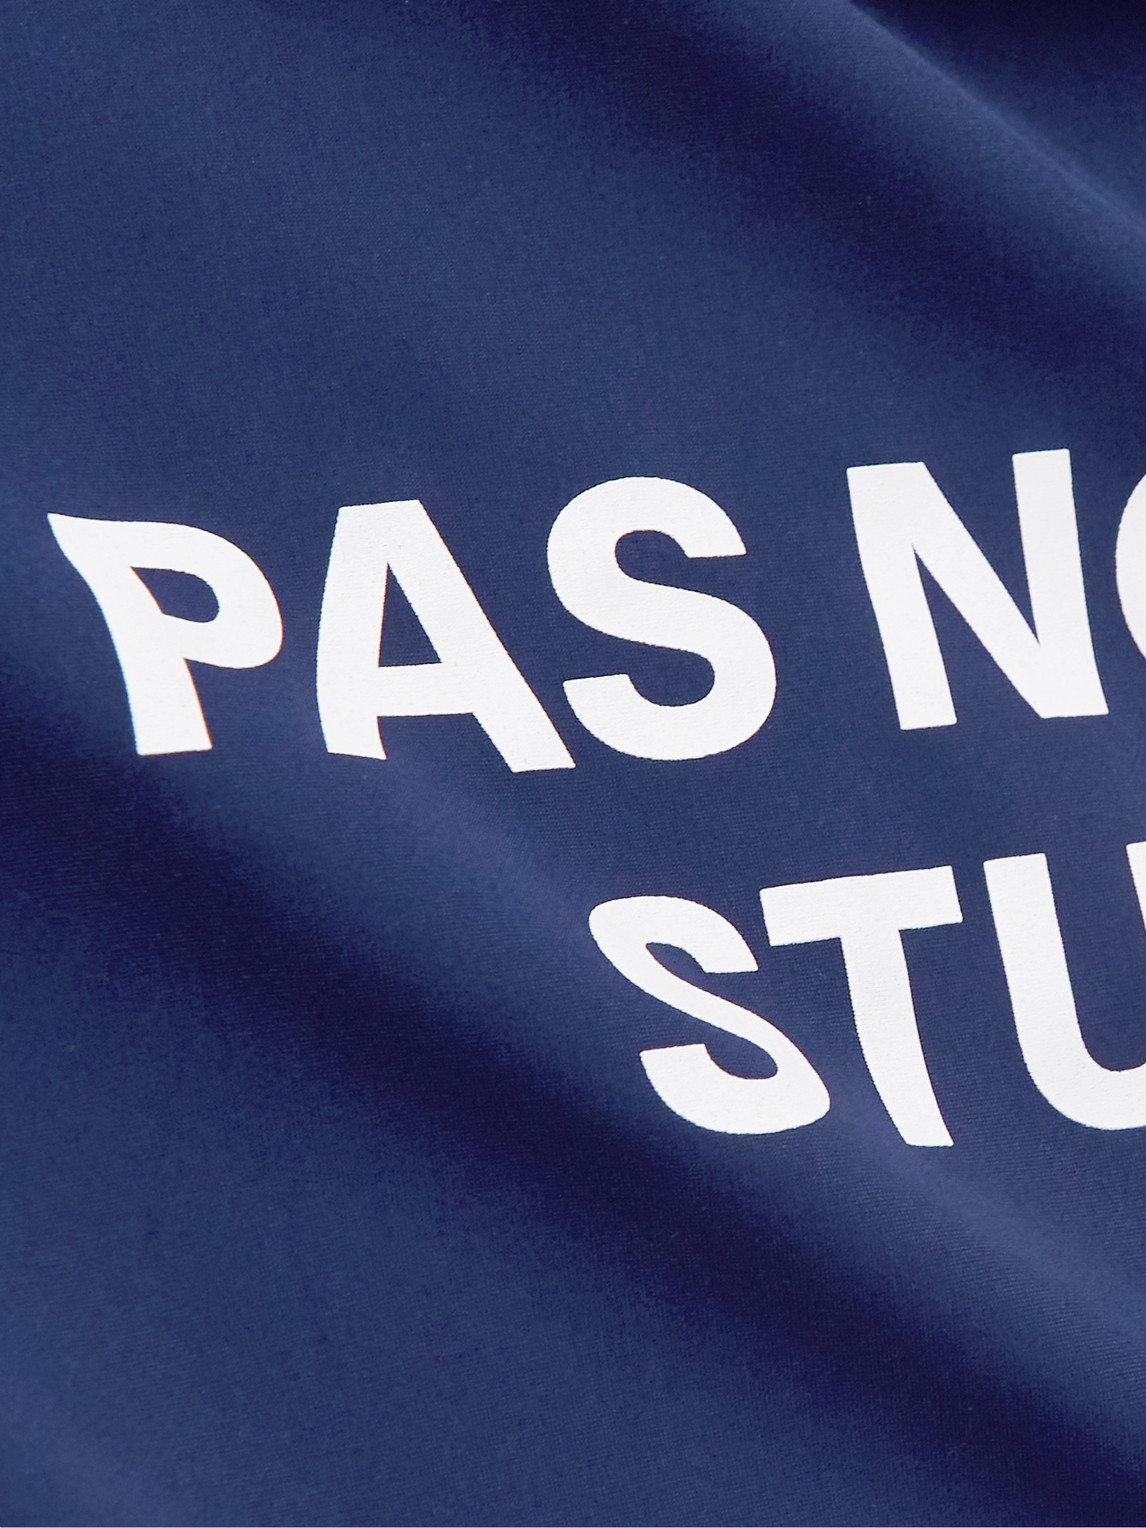 Shop Pas Normal Studios Essential Logo-print Cycling Jersey In Blue